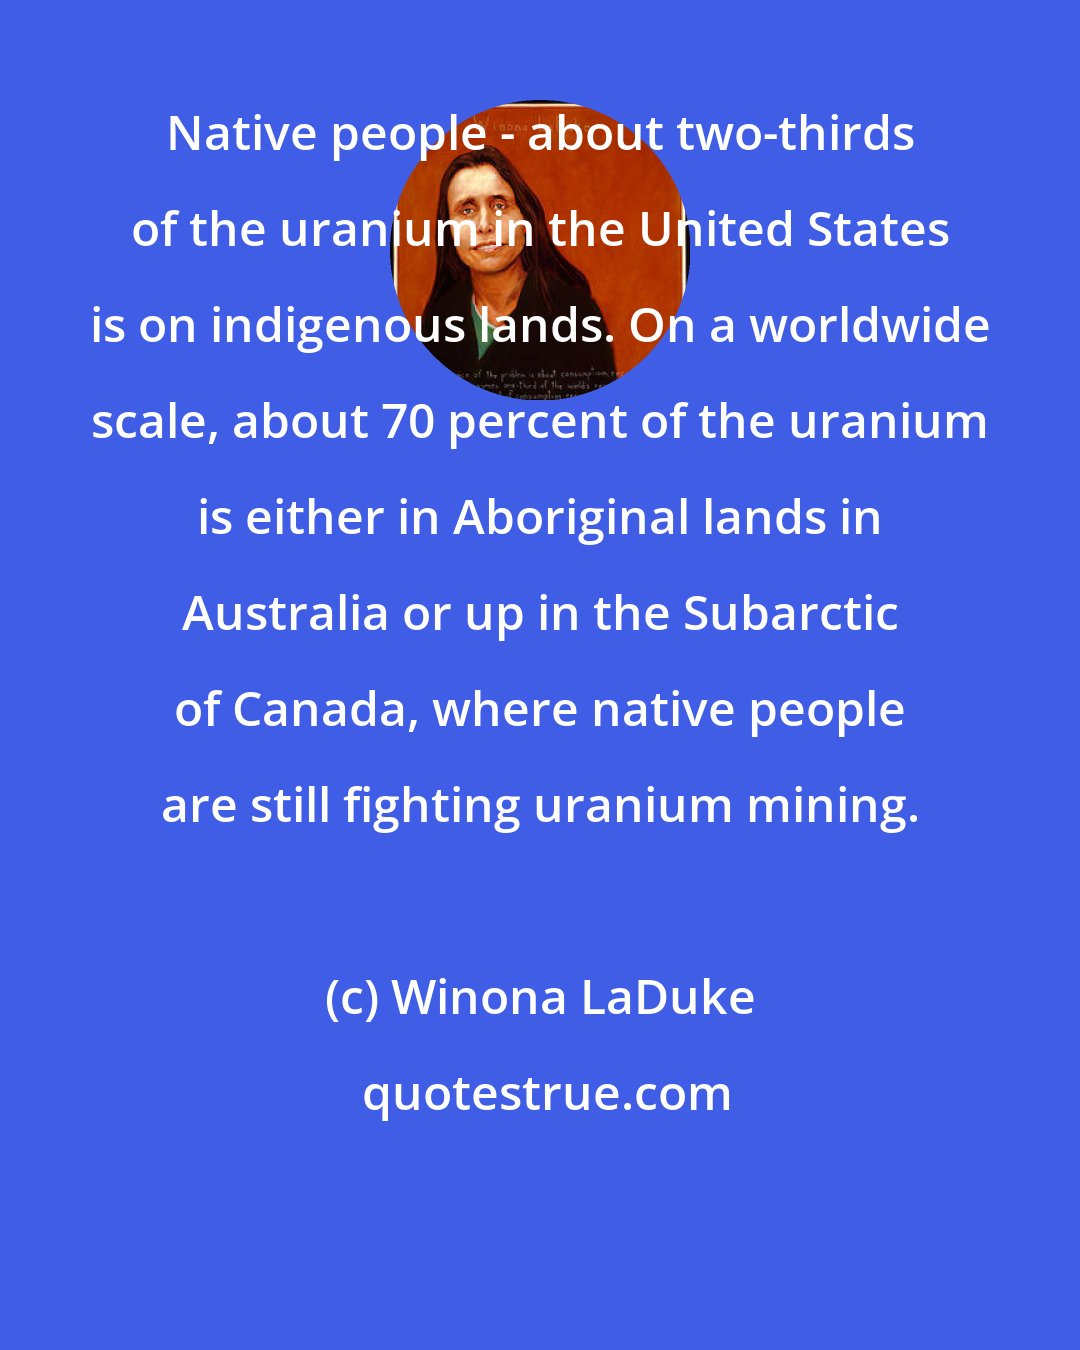 Winona LaDuke: Native people - about two-thirds of the uranium in the United States is on indigenous lands. On a worldwide scale, about 70 percent of the uranium is either in Aboriginal lands in Australia or up in the Subarctic of Canada, where native people are still fighting uranium mining.